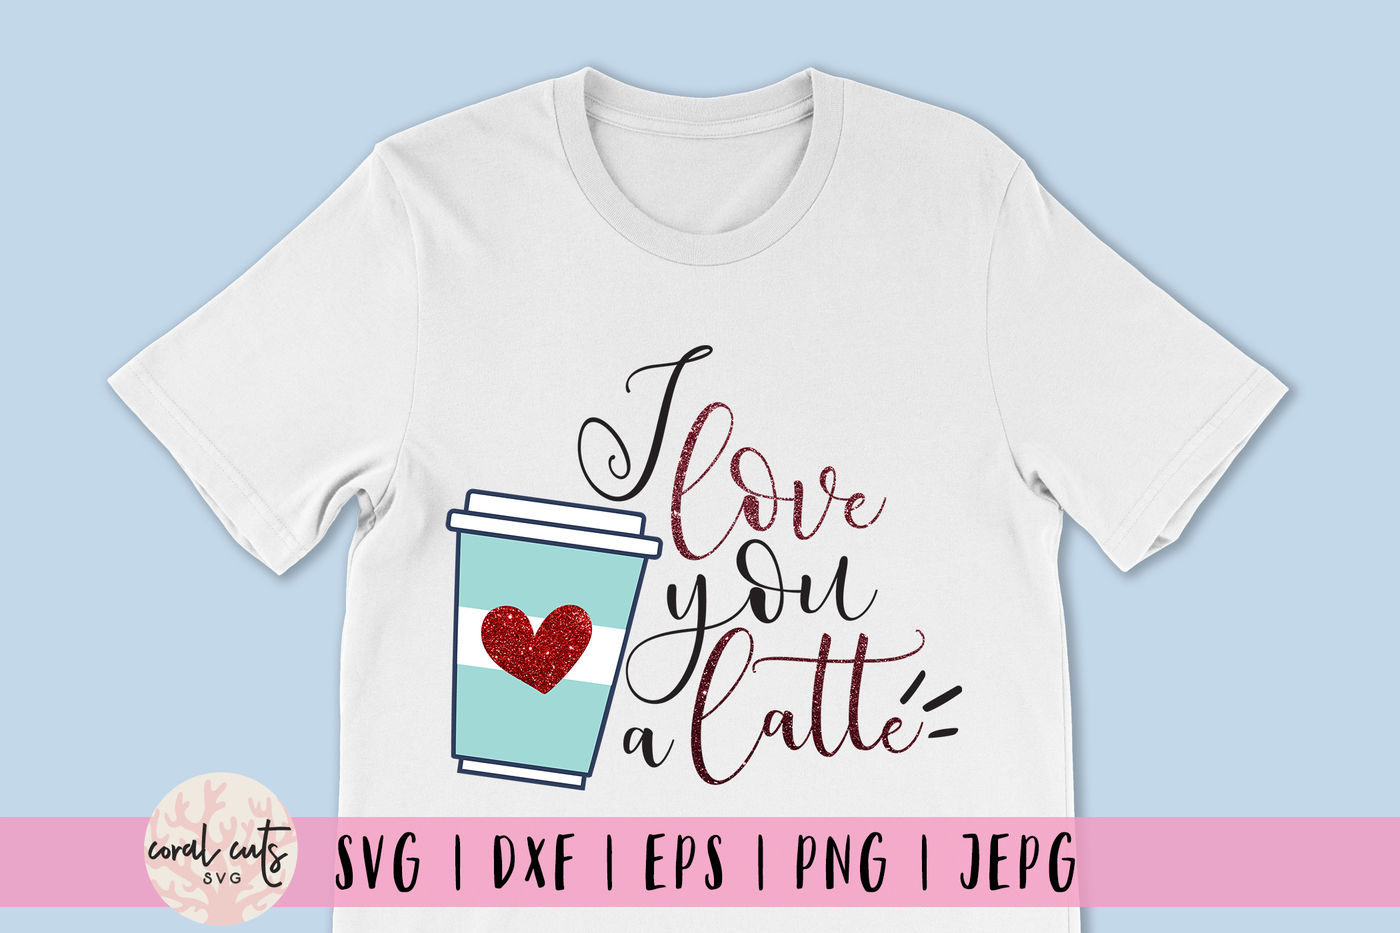 ori 3522305 a9fa902bc7e057eeed9968de8f08746cd6b83969 i love you latte love svg eps dxf png